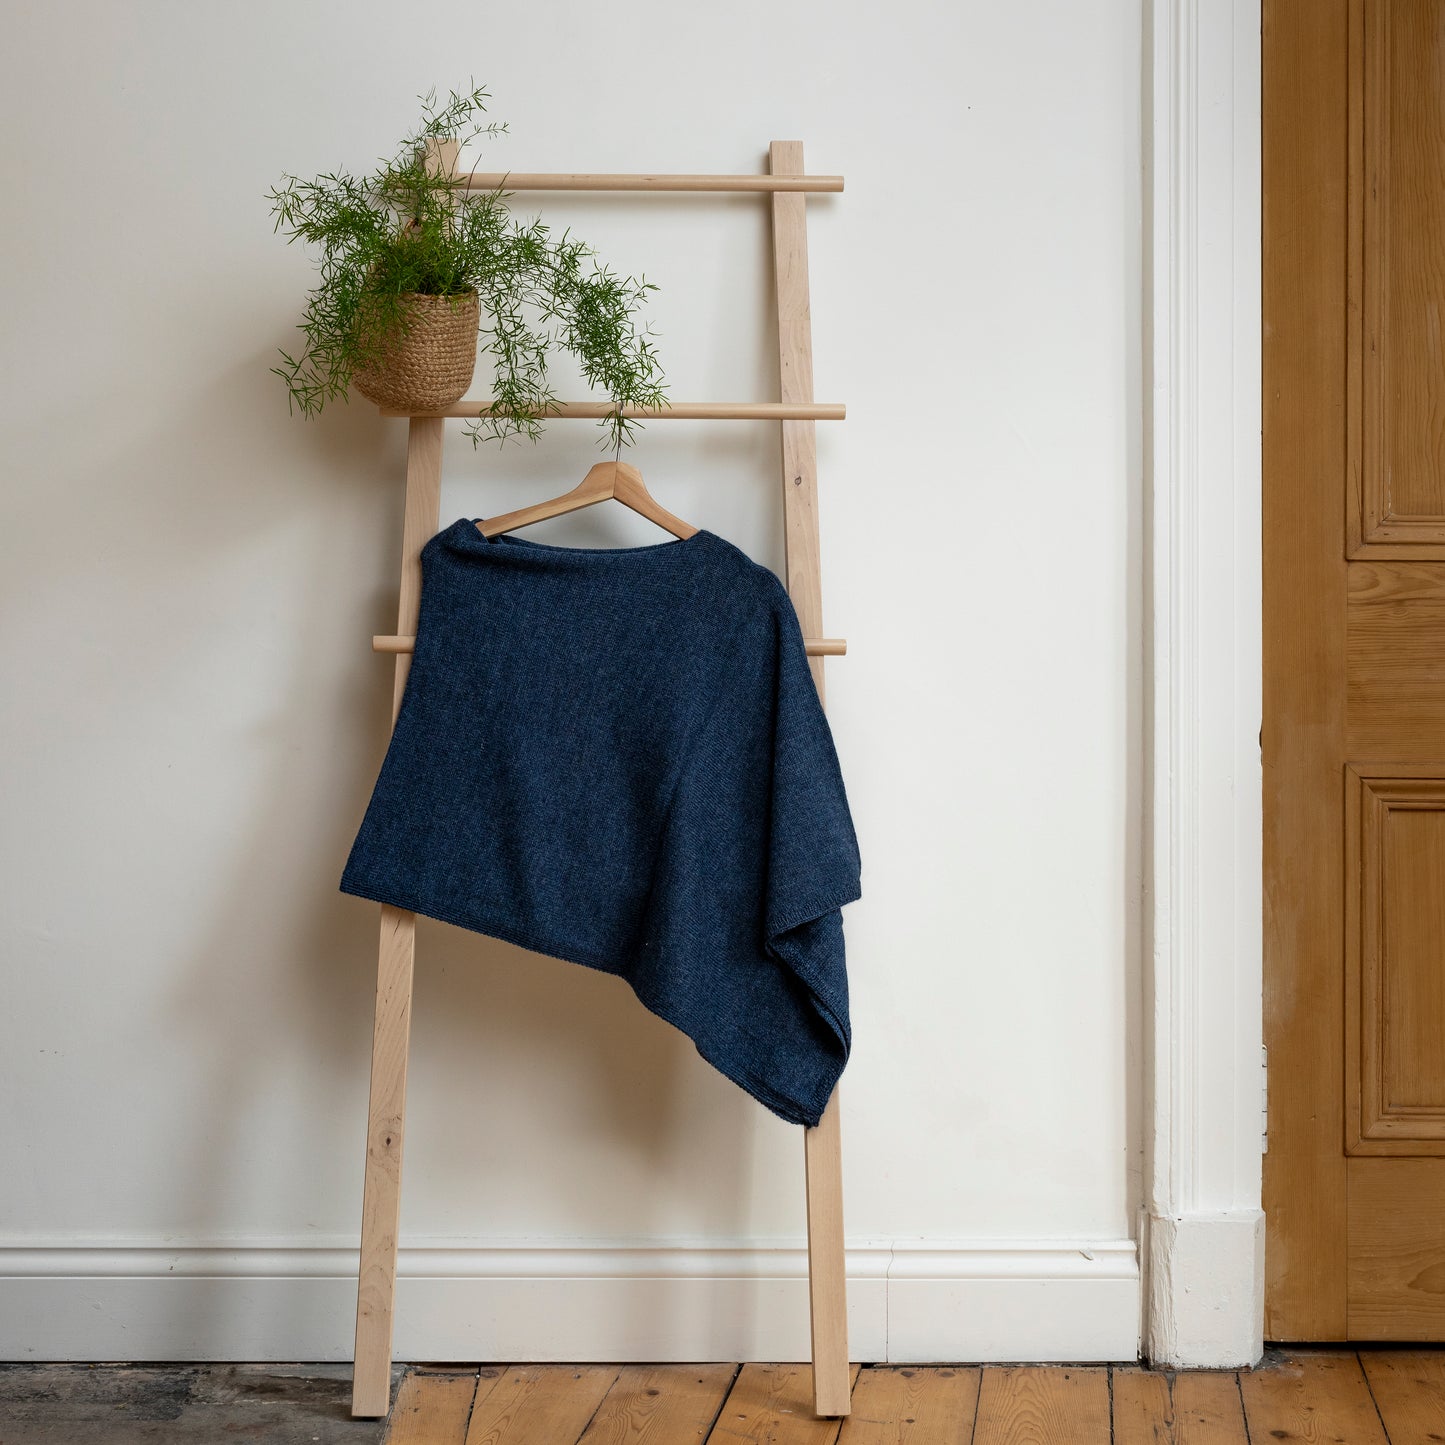 Asymmetrical dark blue luxury knitted poncho hanging on wooden ladder.